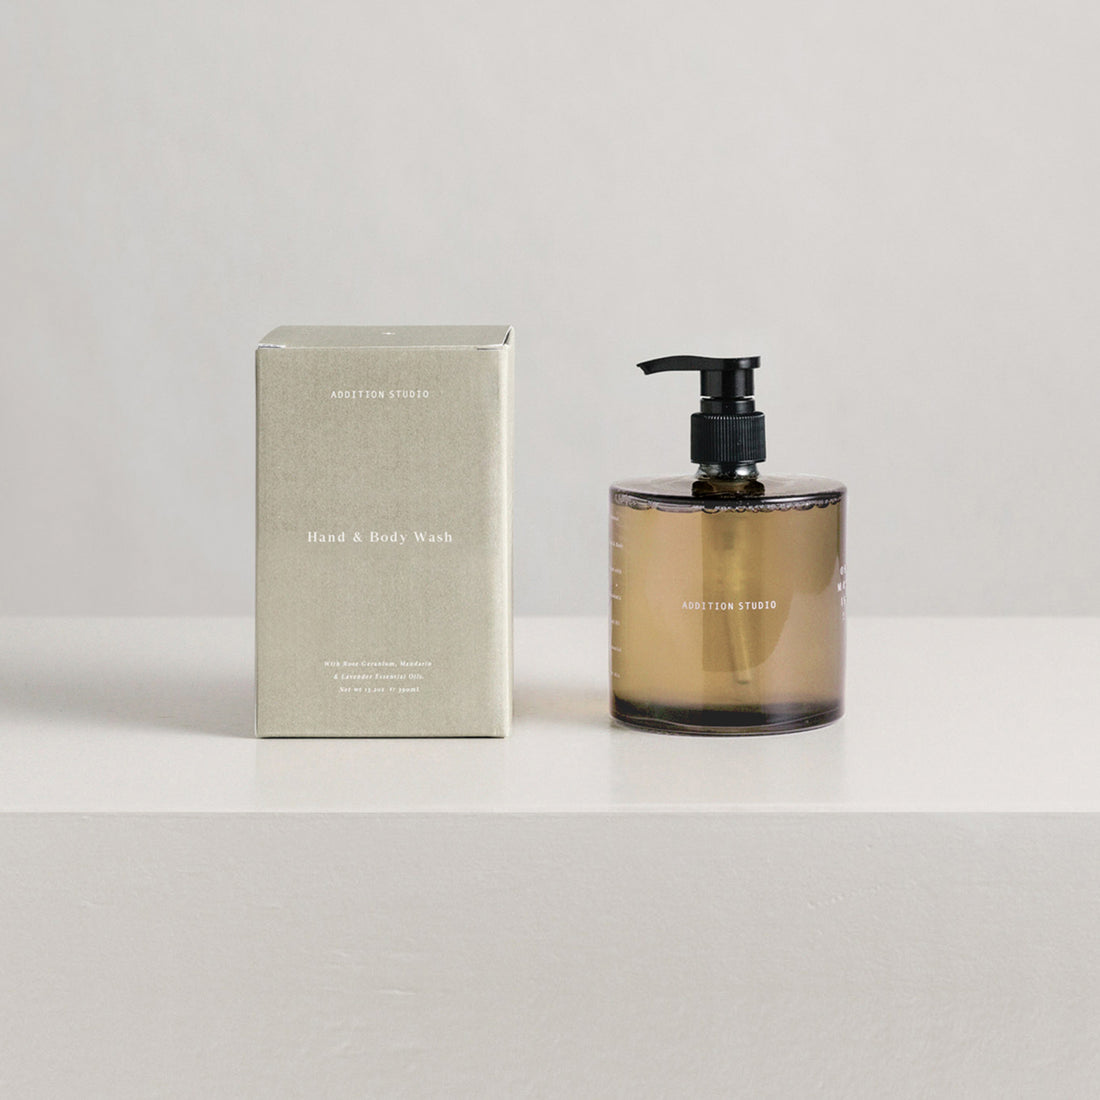 OSMOSIS HAND AND BODY WASH BY ADDITION STUDIO